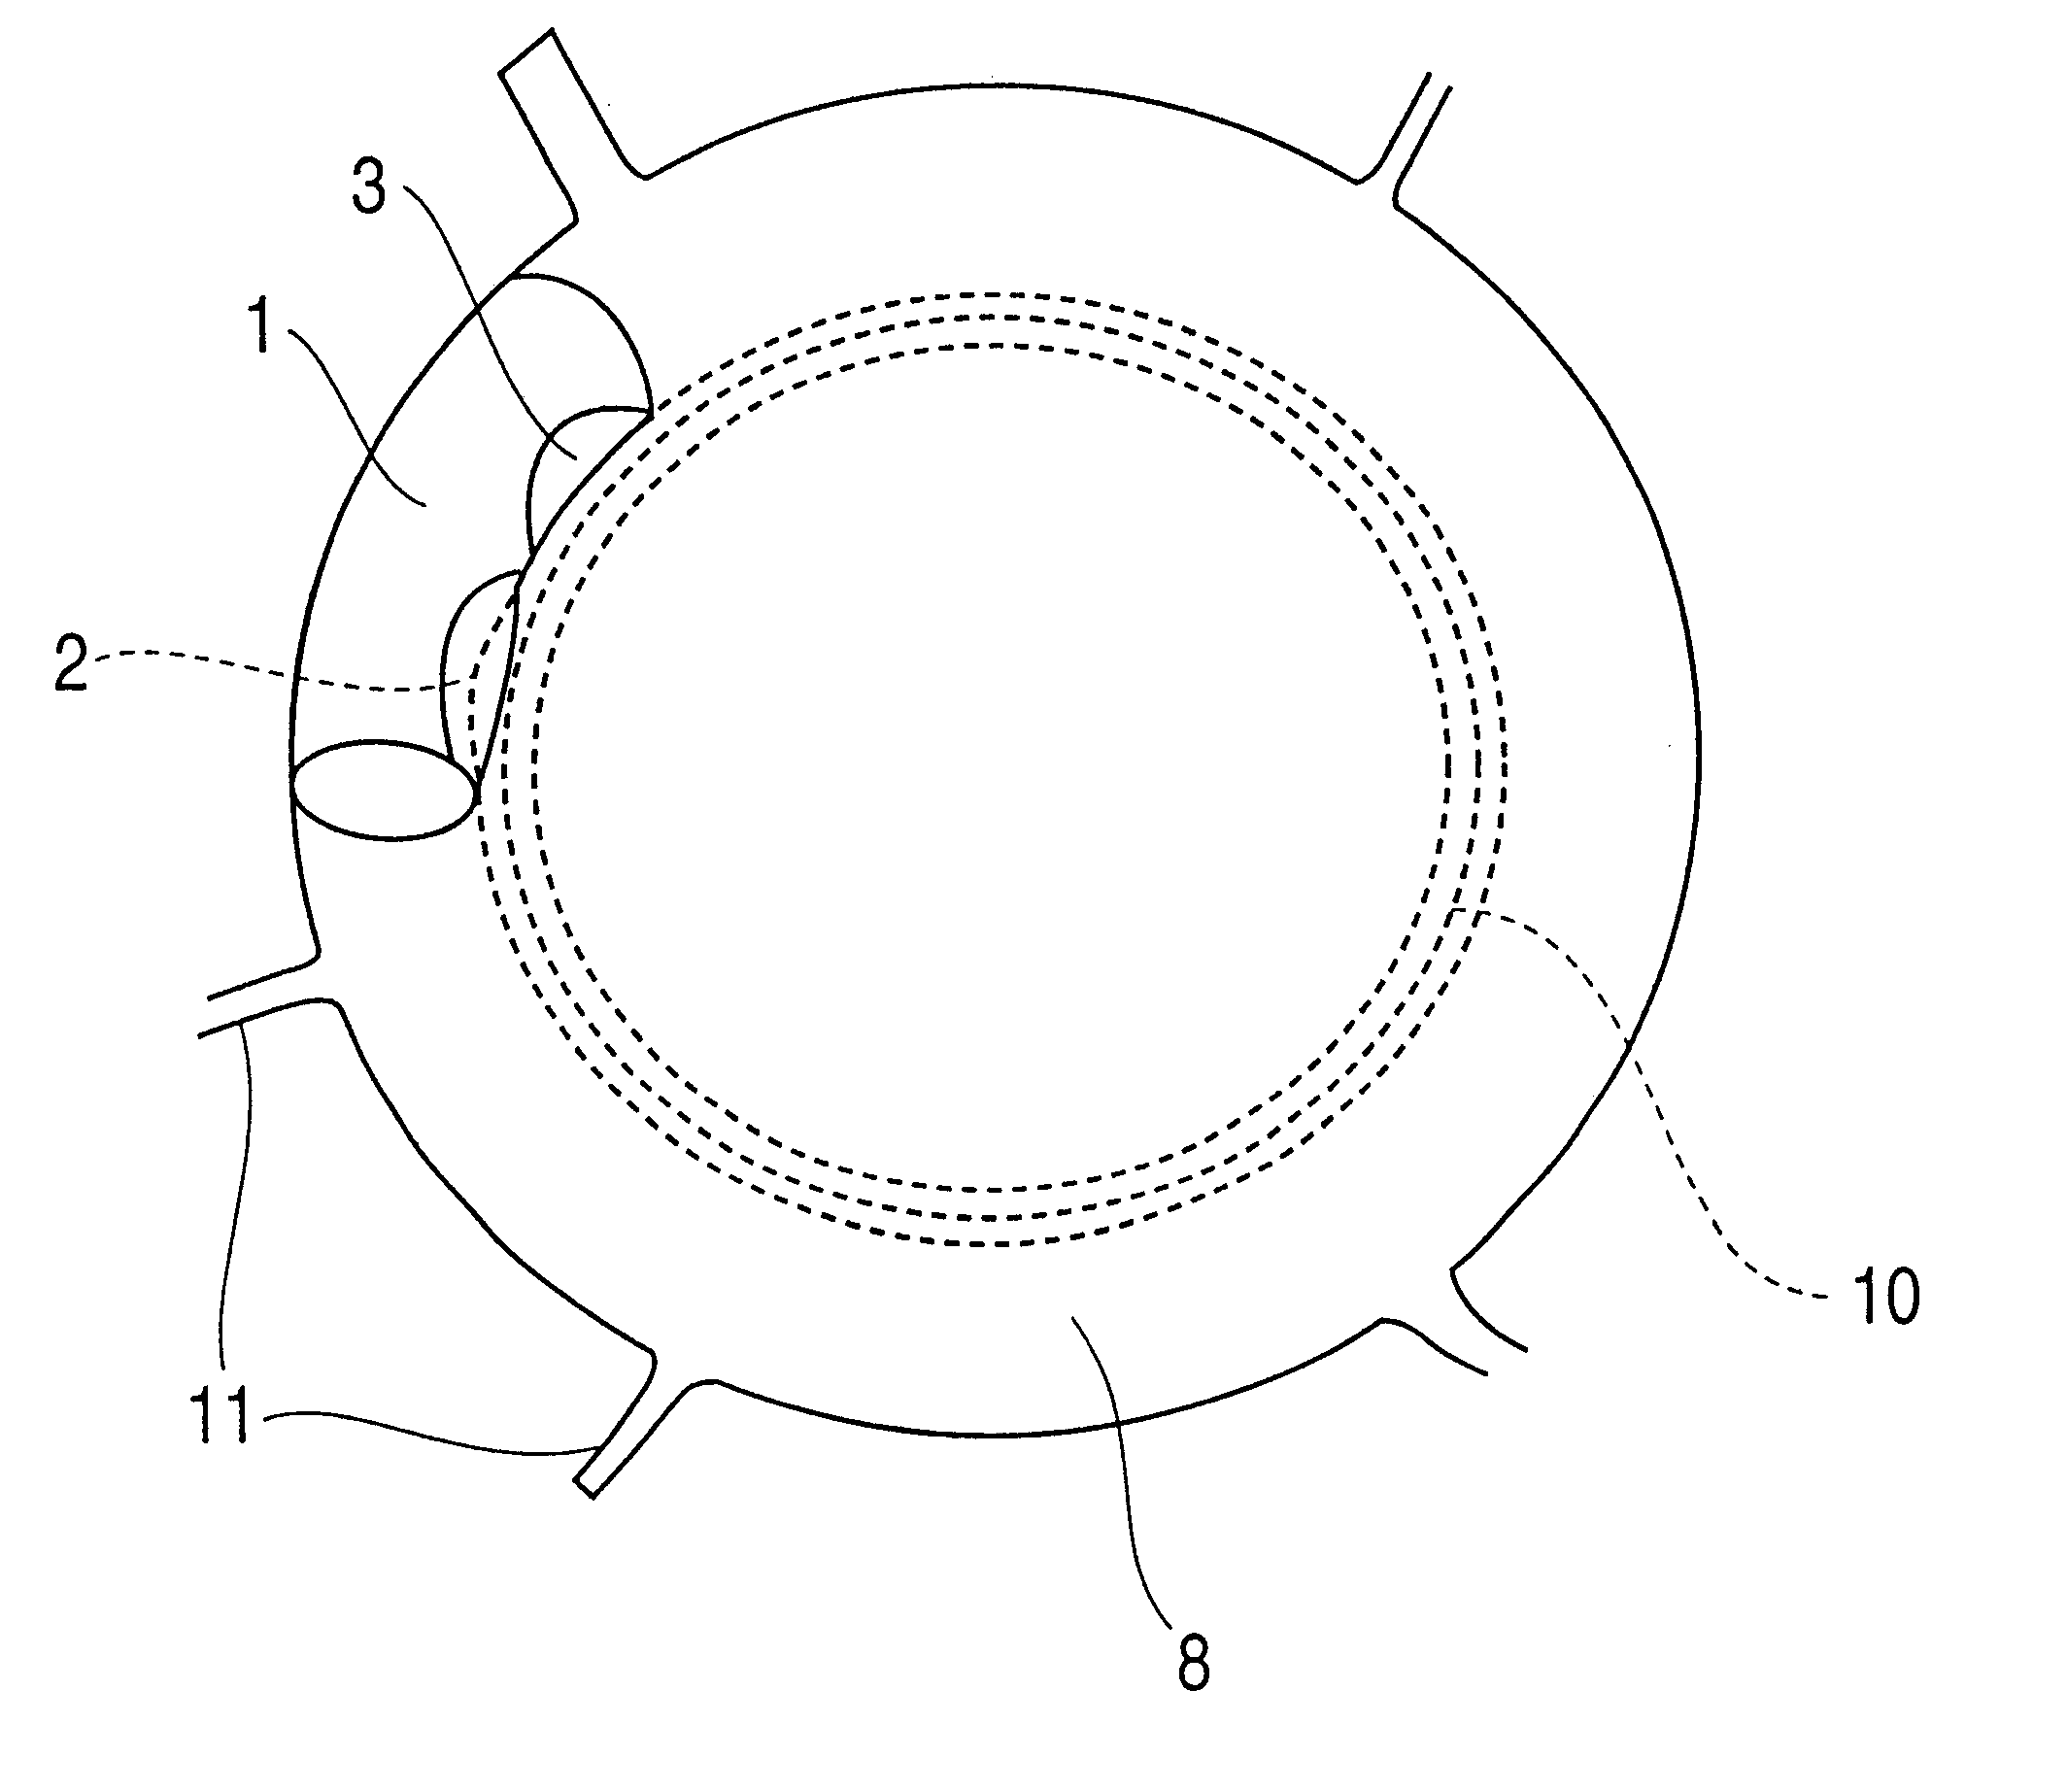 Device for improving in a targeted manner and/or permanently ensuring the ability of the aqueous humor to pass through the trabecular meshwork